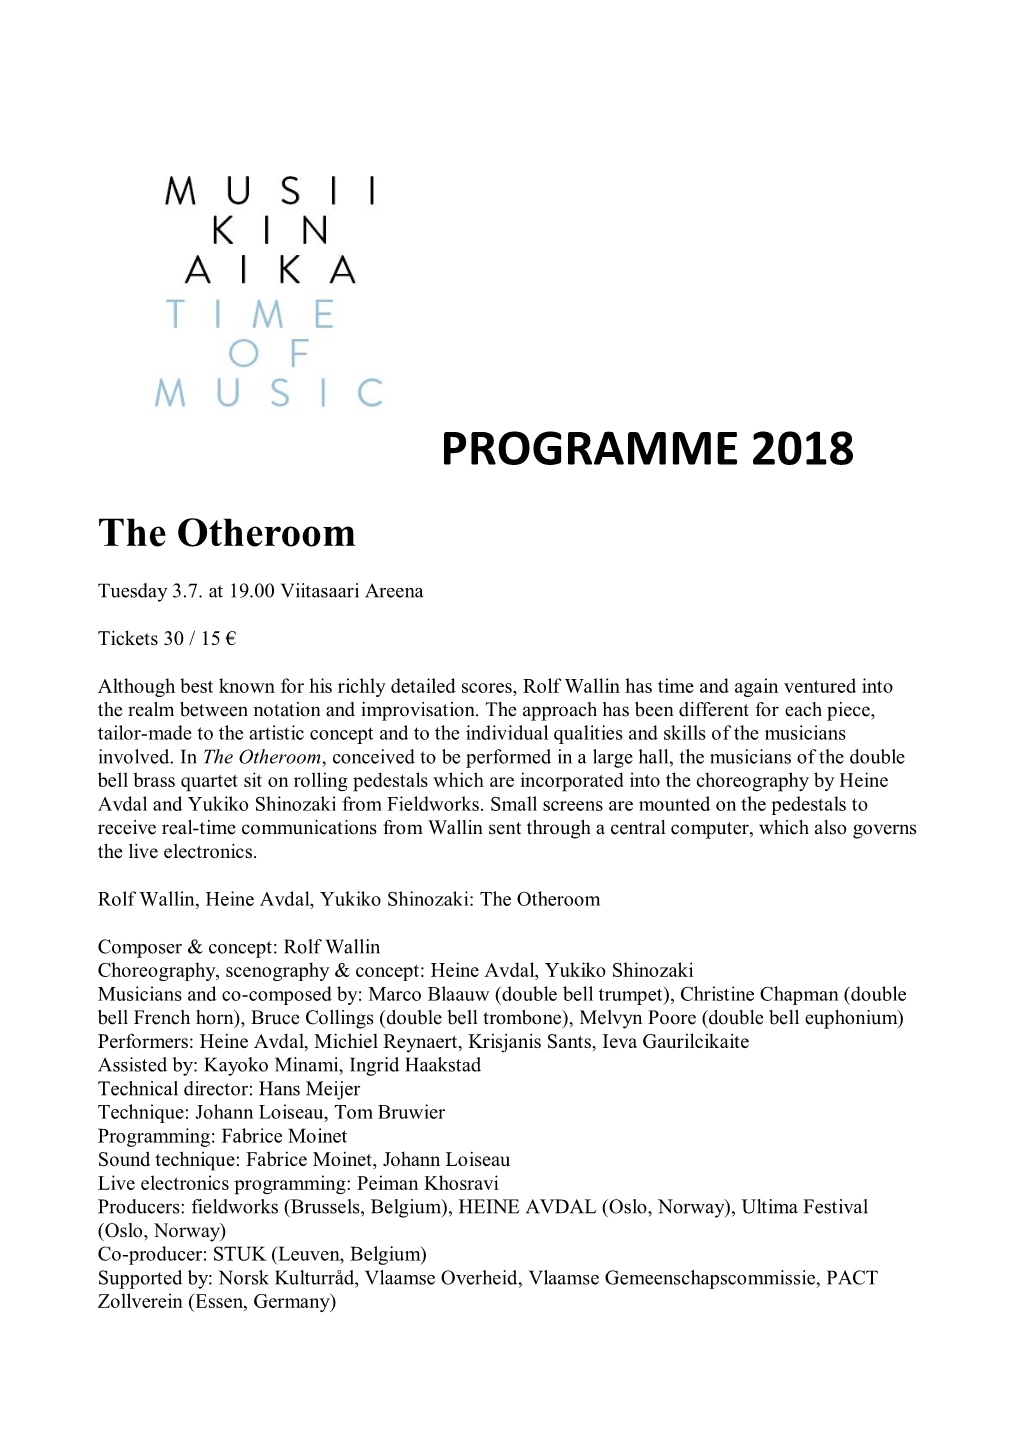 Time of Music Programme 2018